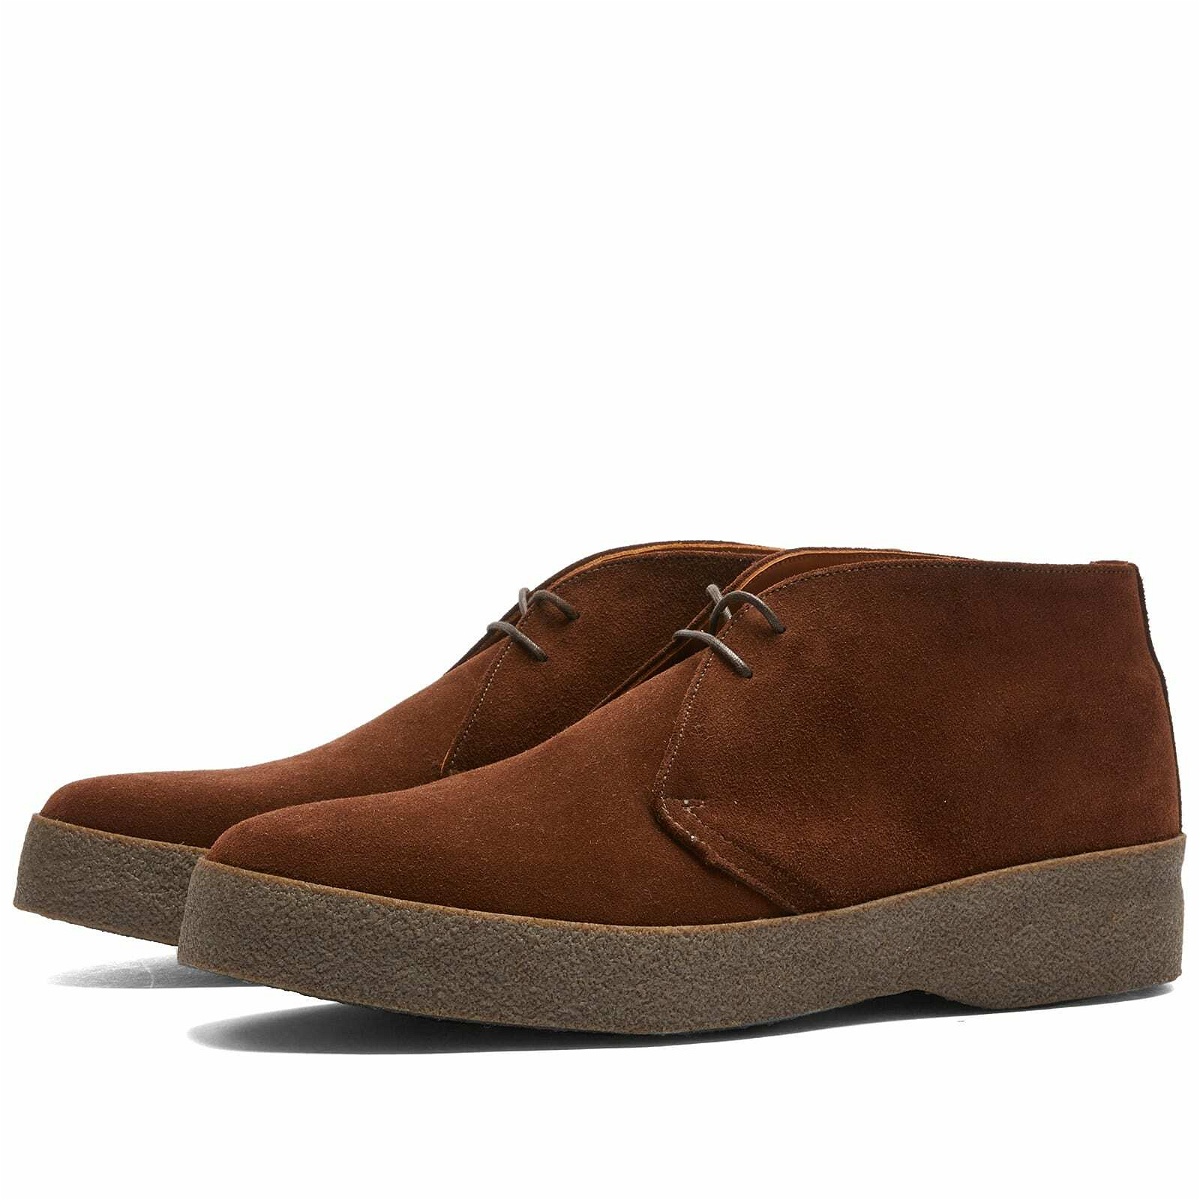 Photo: Sanders Men's Sam Chukka Boot in Polo Snuff Suede